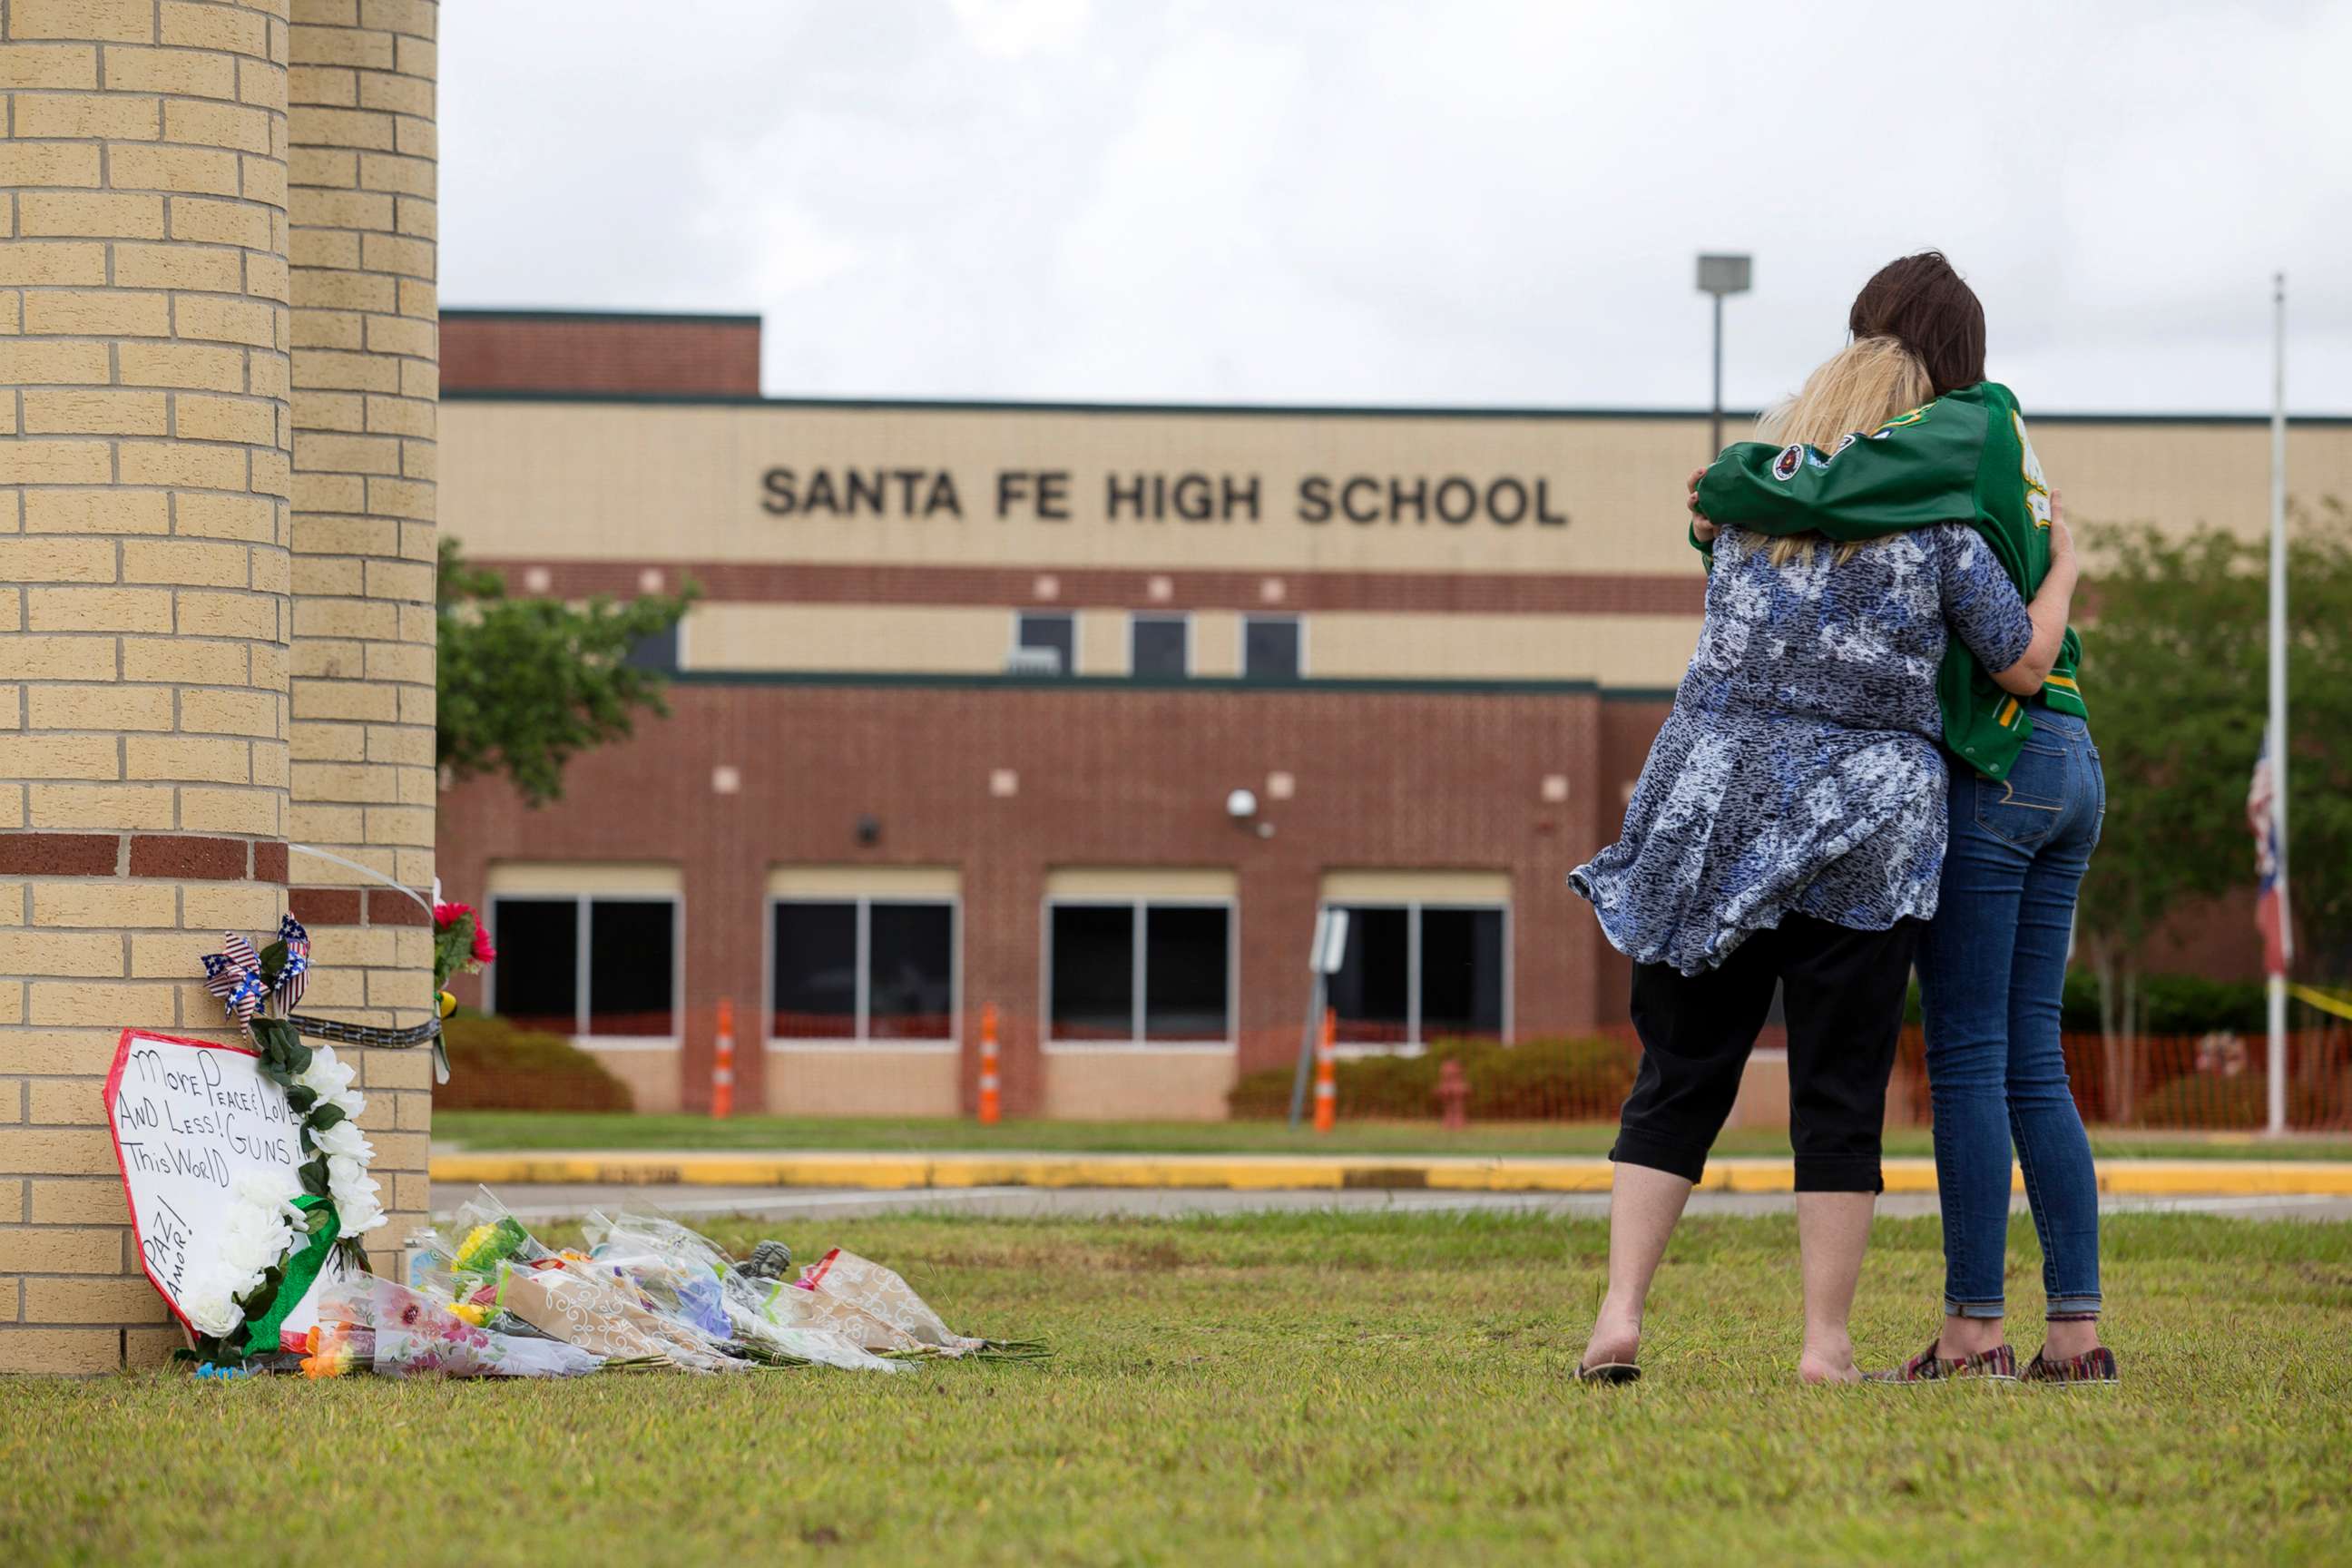 PHOTO: Senior Amy Roden, who knew one of the victims, and her grandmother Gail, embrace at a makeshift memorial for shooting victims outside Santa Fe High School in Santa Fe, Texas, May 20, 2018.